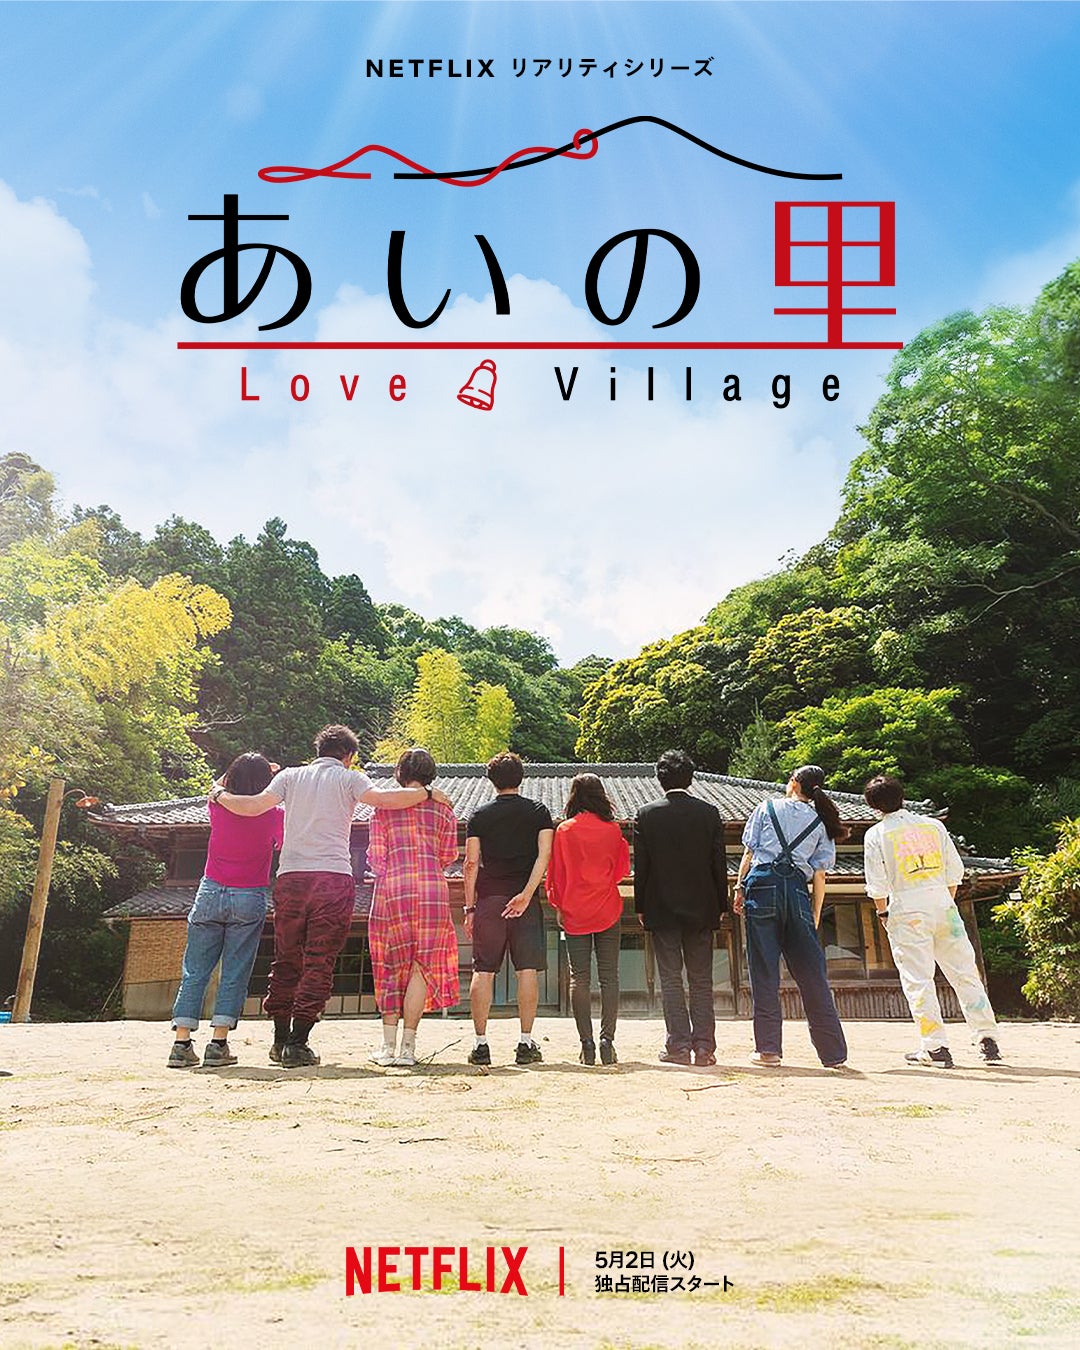 TV ratings for Love Village (あいの里) in Malaysia. Netflix TV series